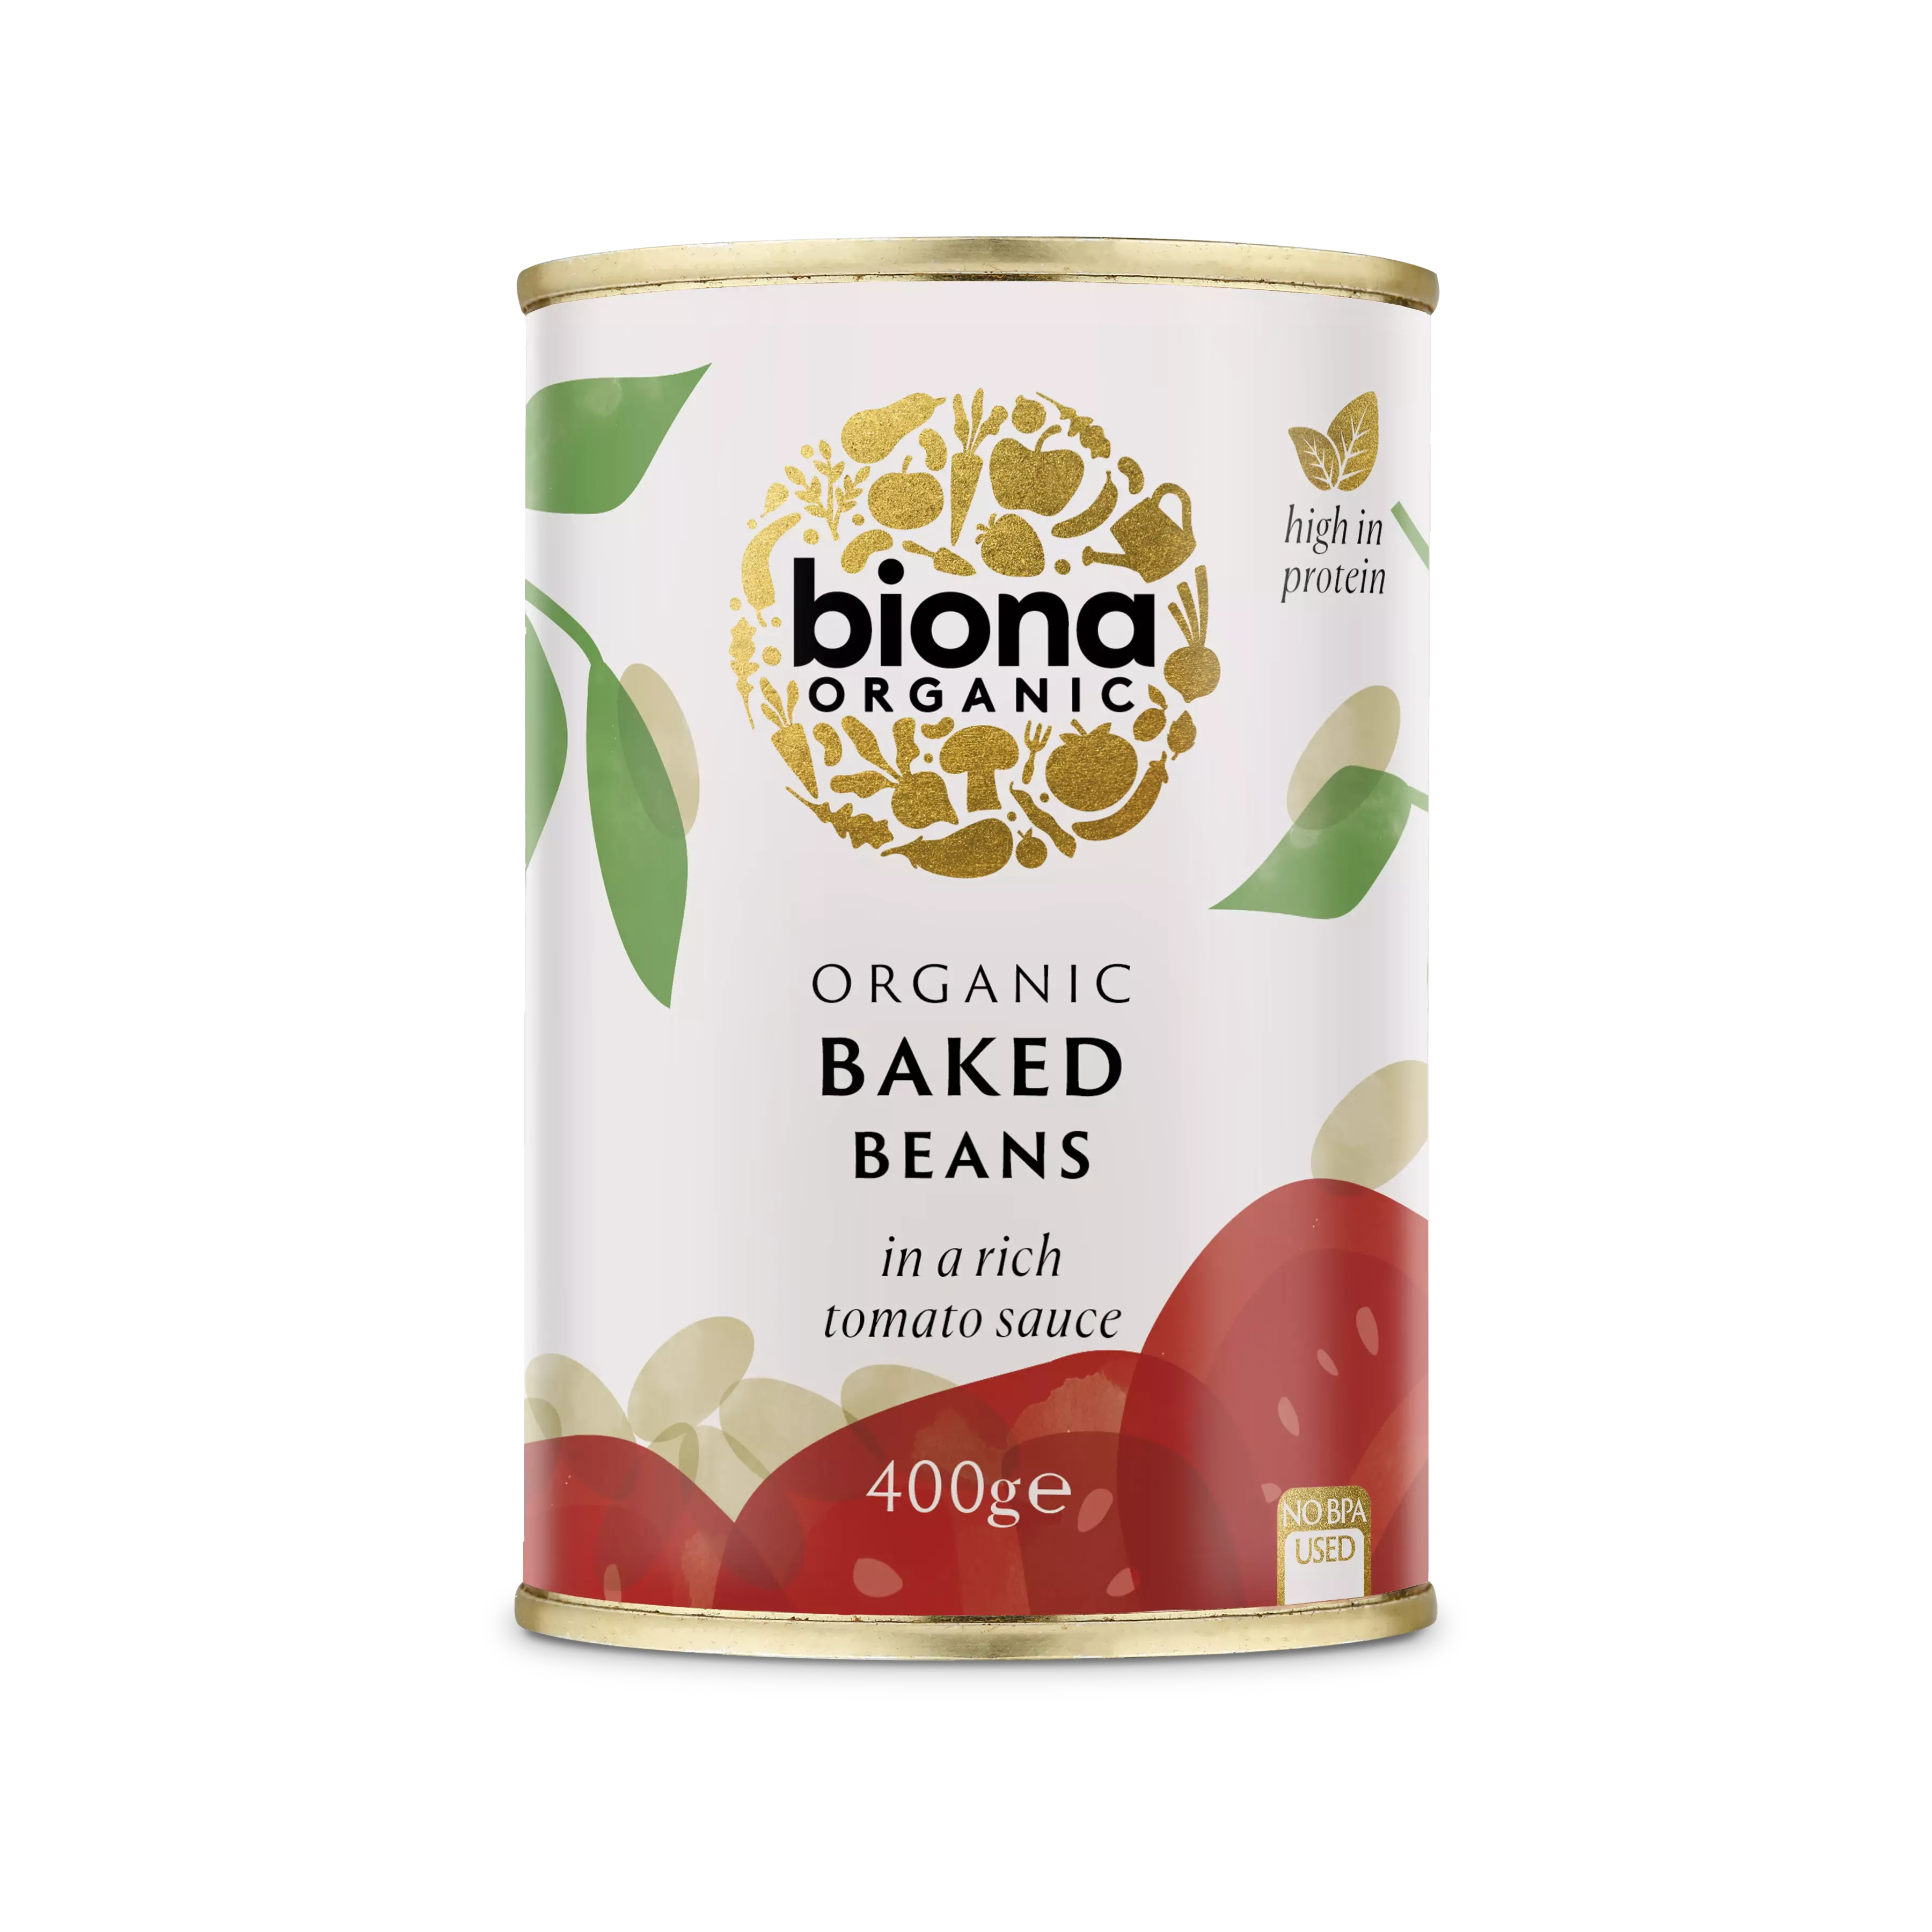 Biona Organic Baked beans in tomato sauce 400g